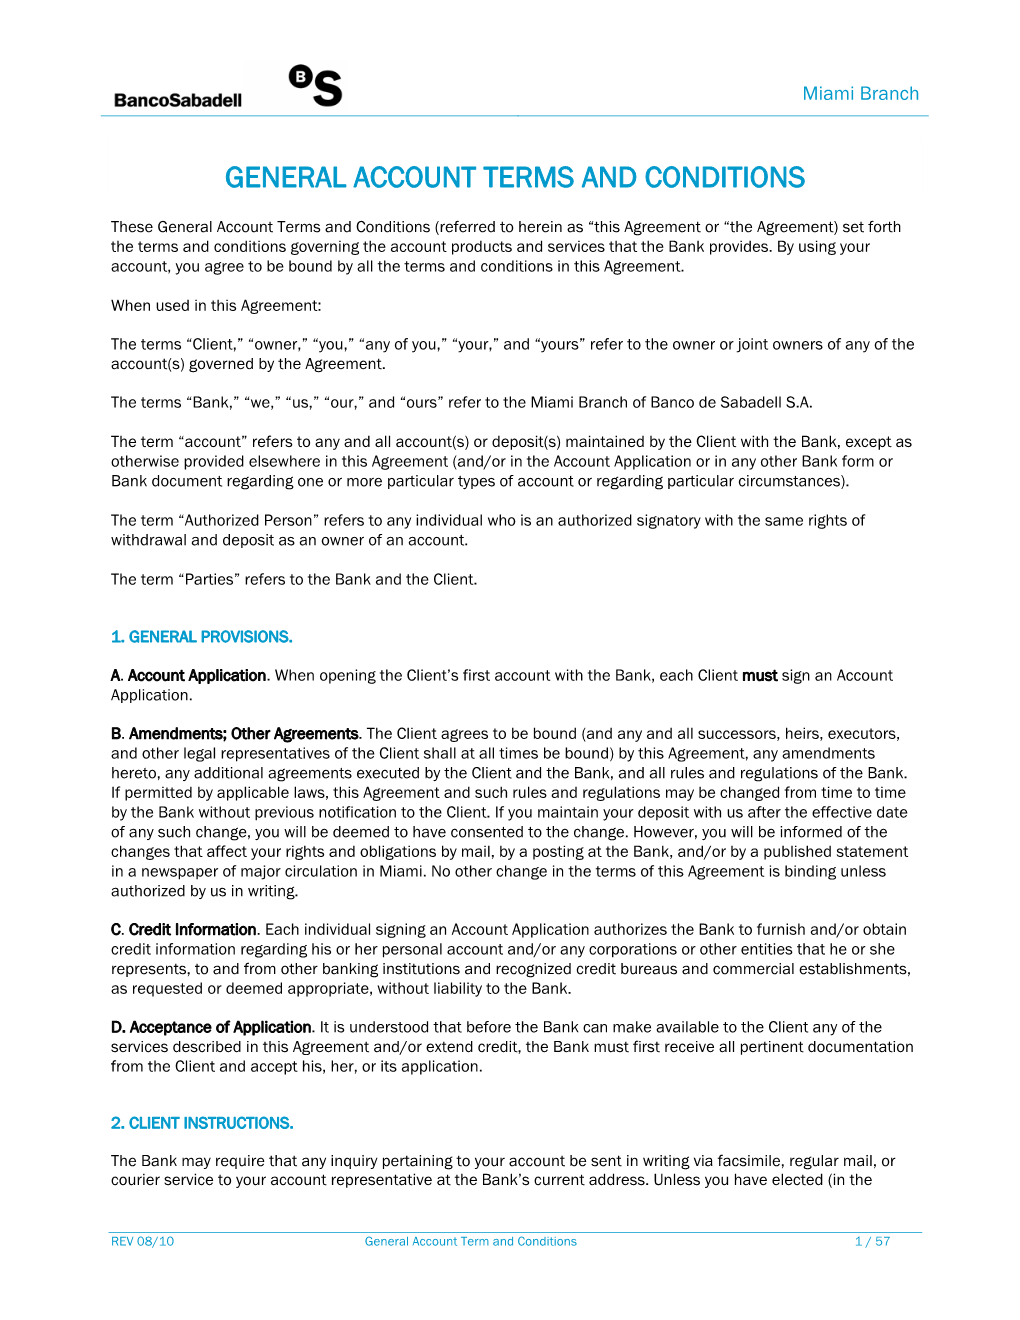 General Account Terms and Conditions